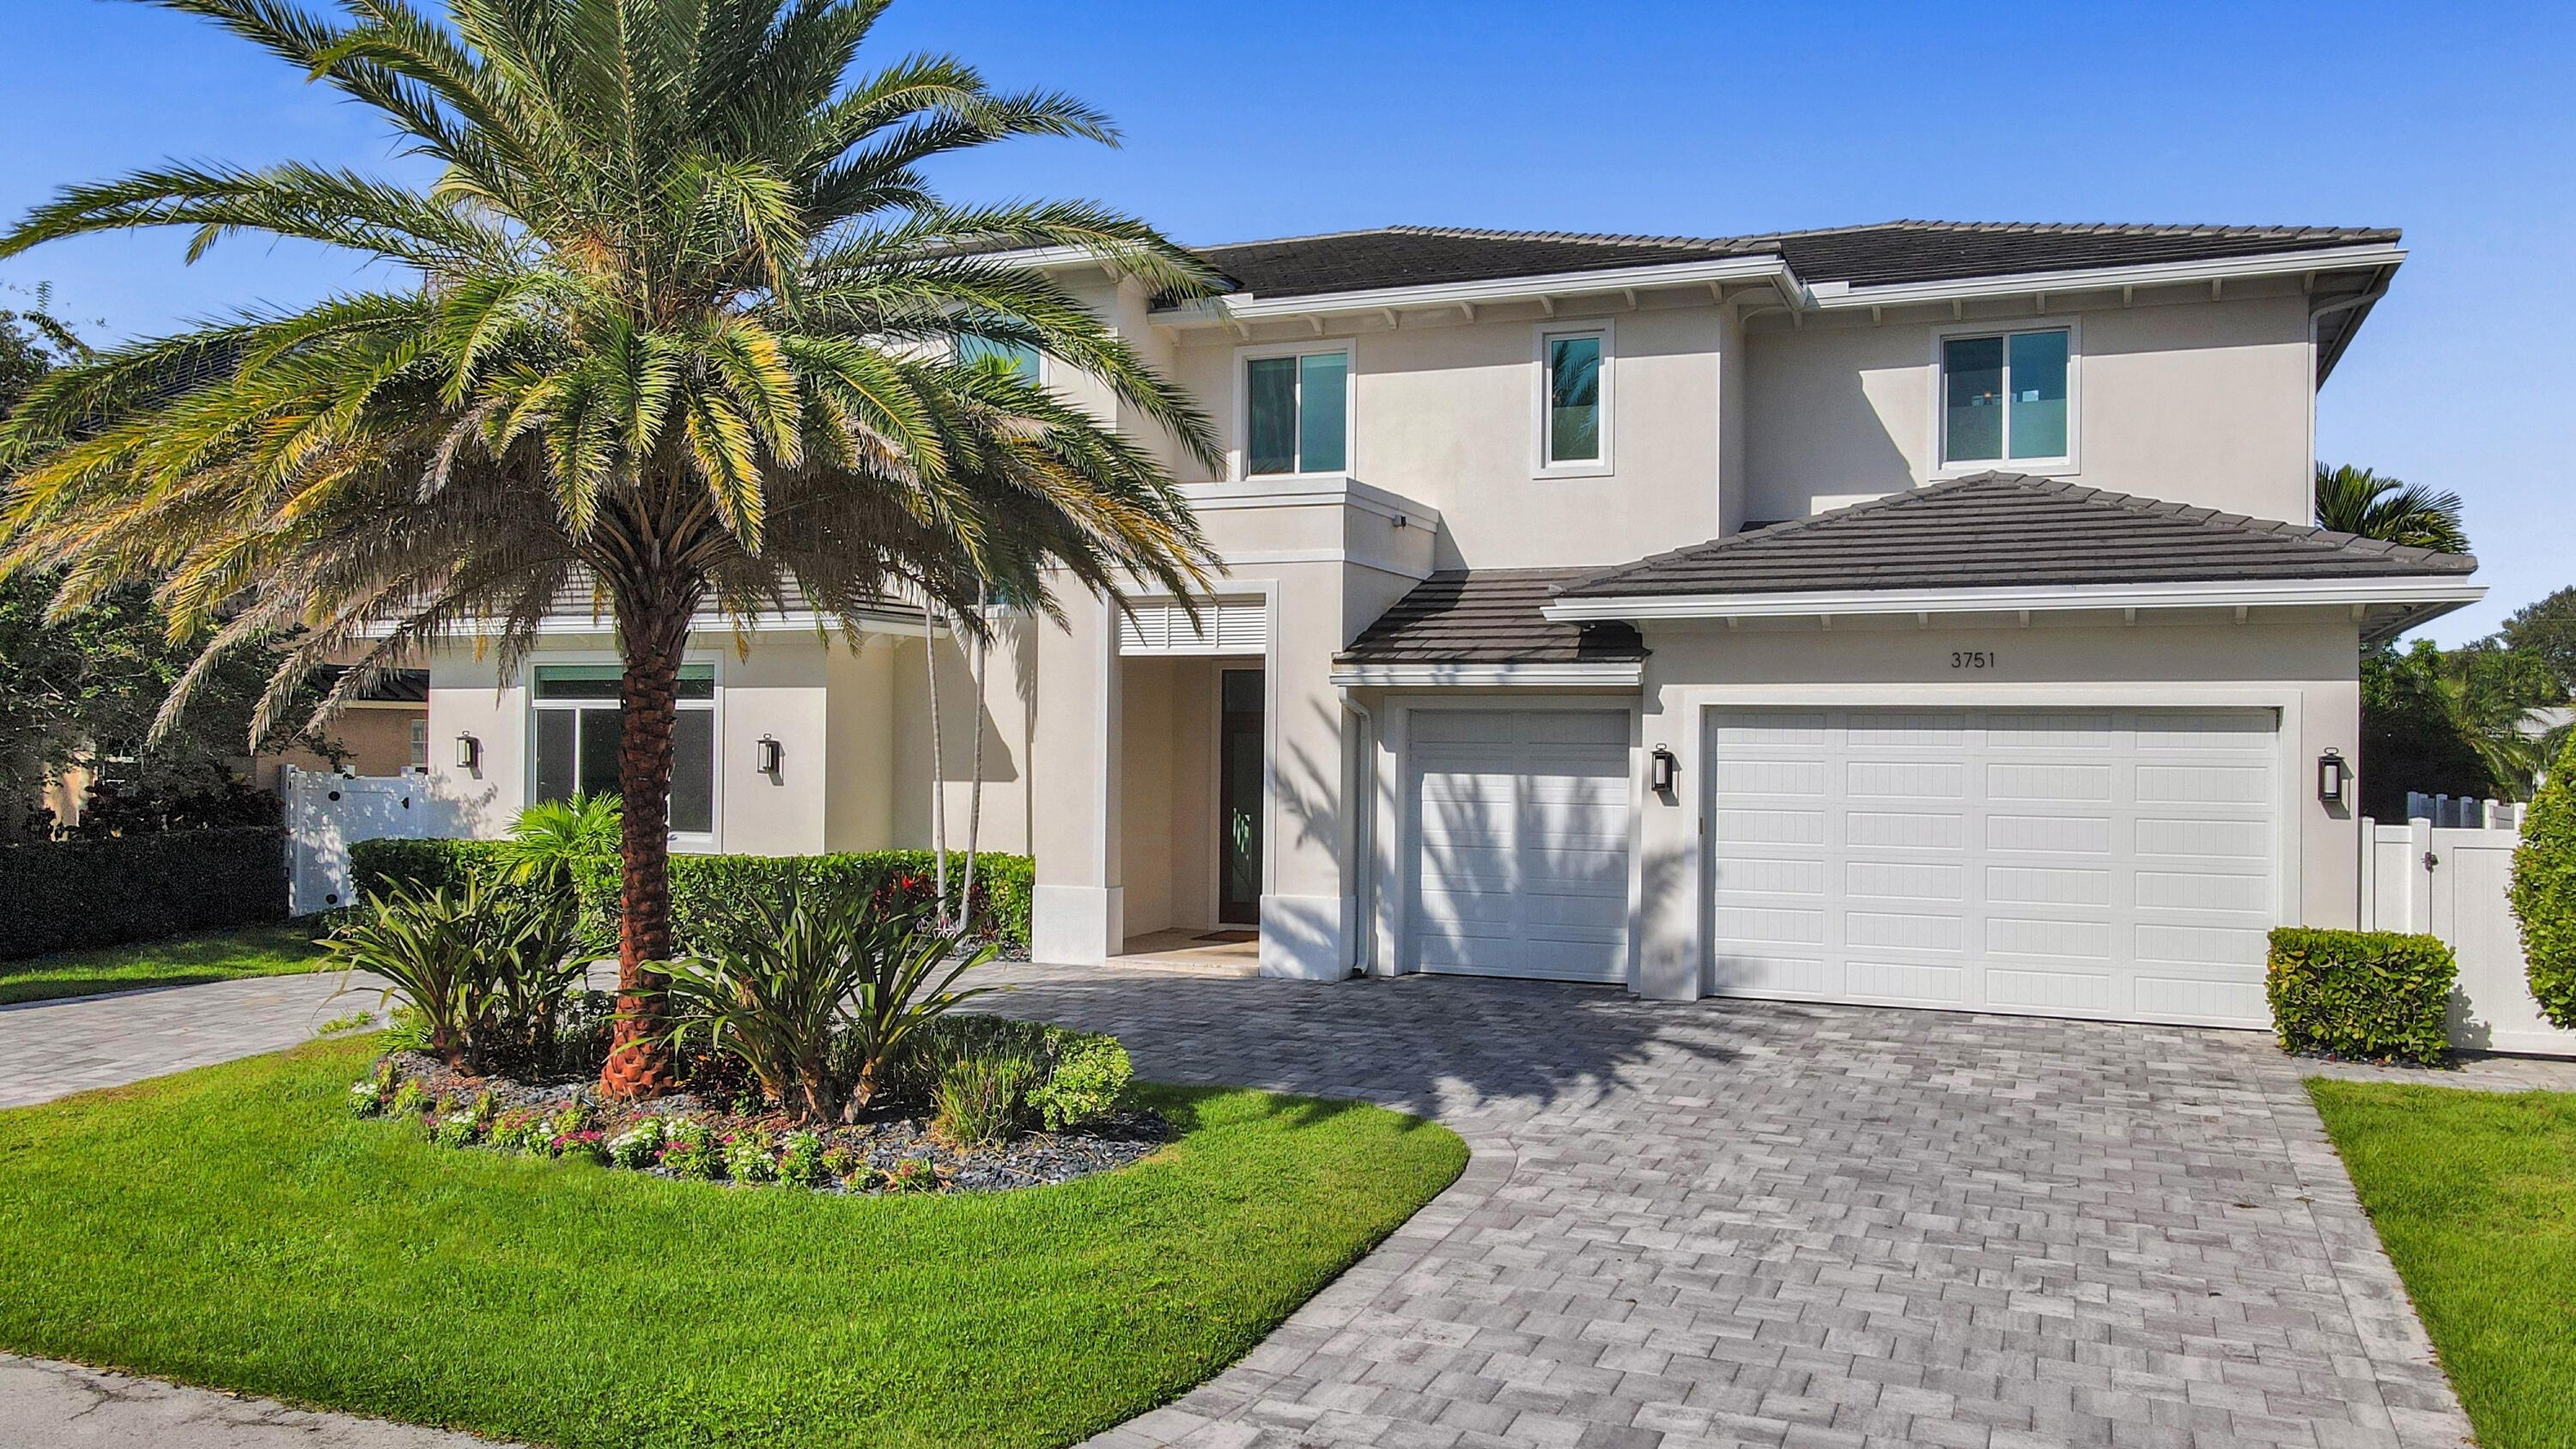 Single Family Home for Sale at Venetian Isles, Lighthouse Point, FL 33064